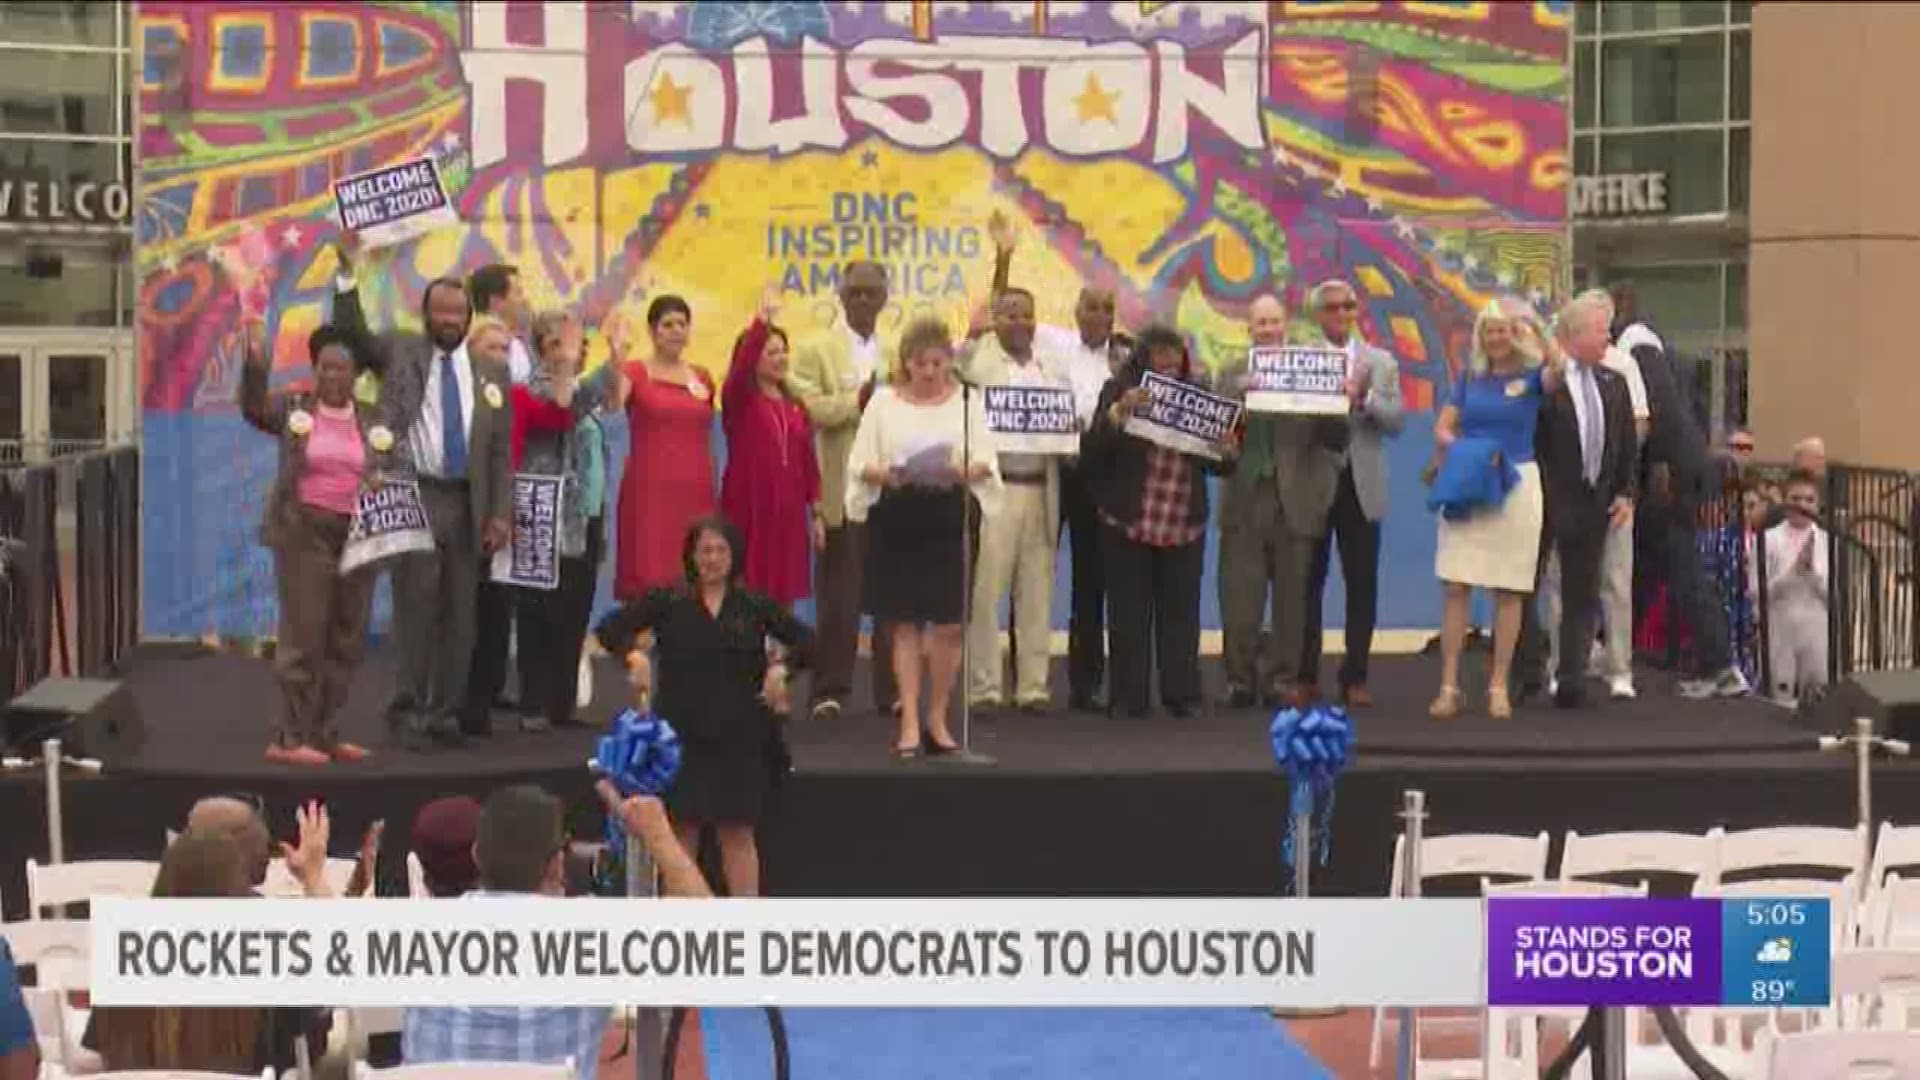 Mayor Sylvester Turner is pulling out all the stops to impress members of the Democratic National Committee in hopes of landing the 2020 convention.